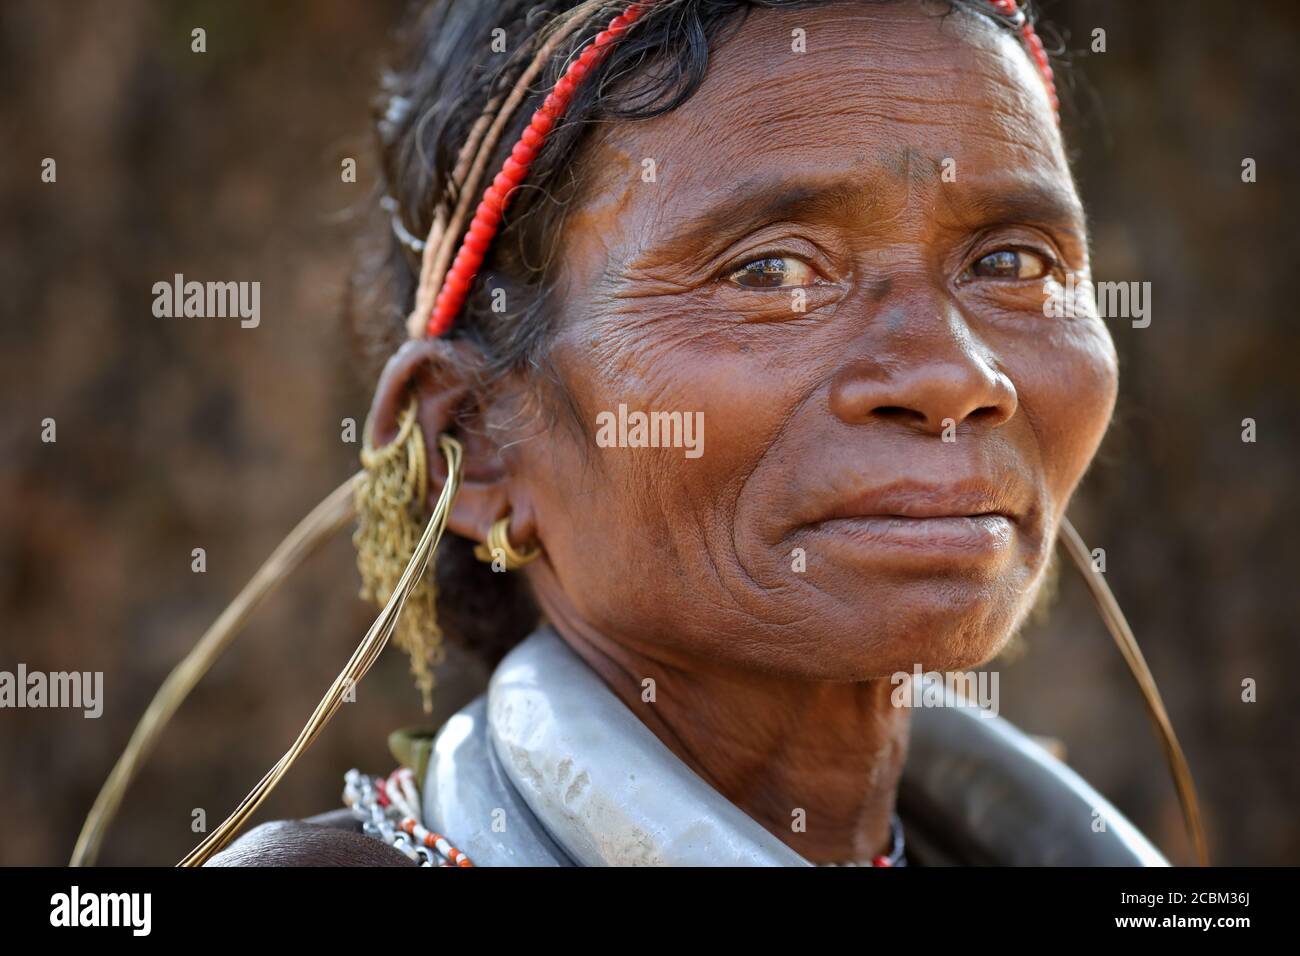 Gadaba tribal woman in a rural village near Koraput in Odisha, India. The Koraput region is well known for its tribal life and traditional culture. Stock Photo